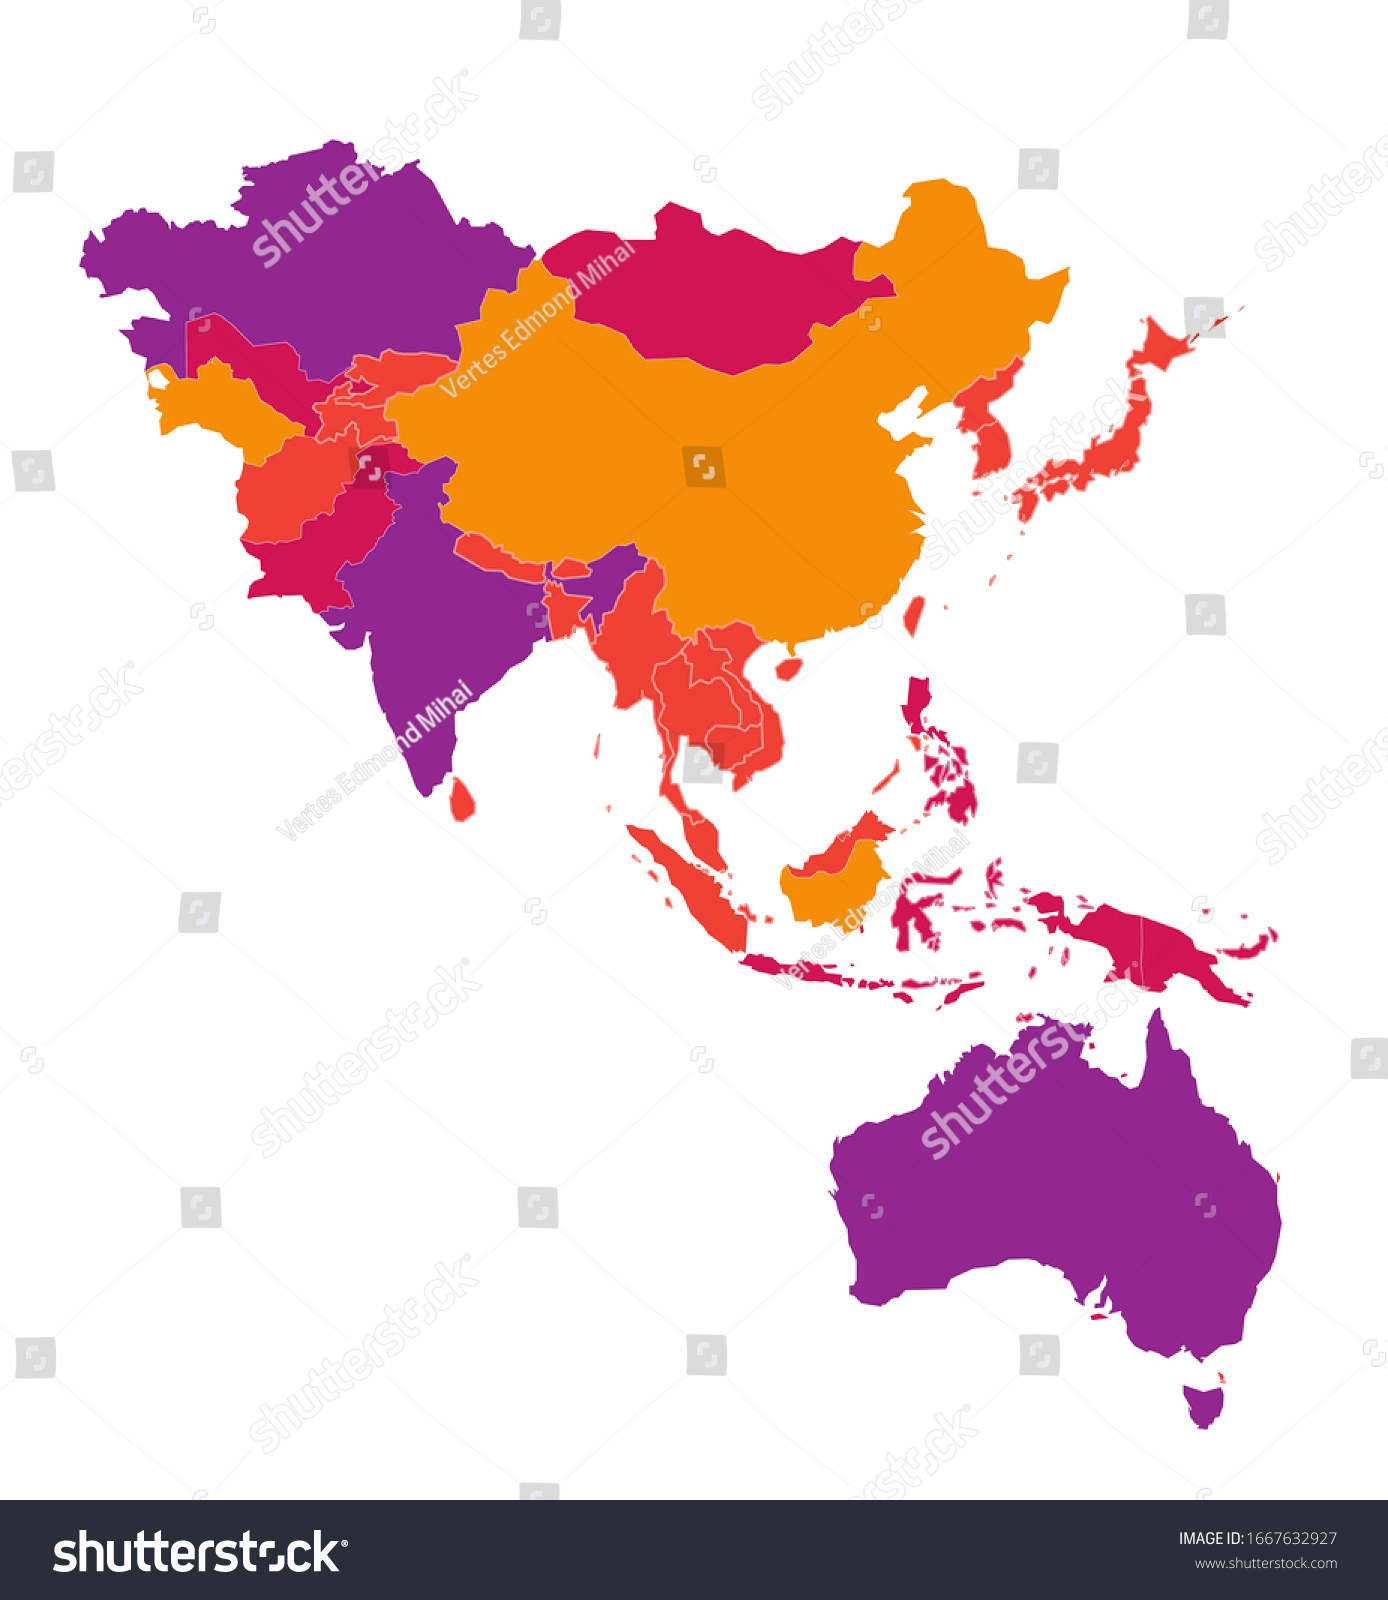 Colored Detailed Vector Map Asia Pacific Stock Vector Royalty Free 1667632927 Shutterstock 